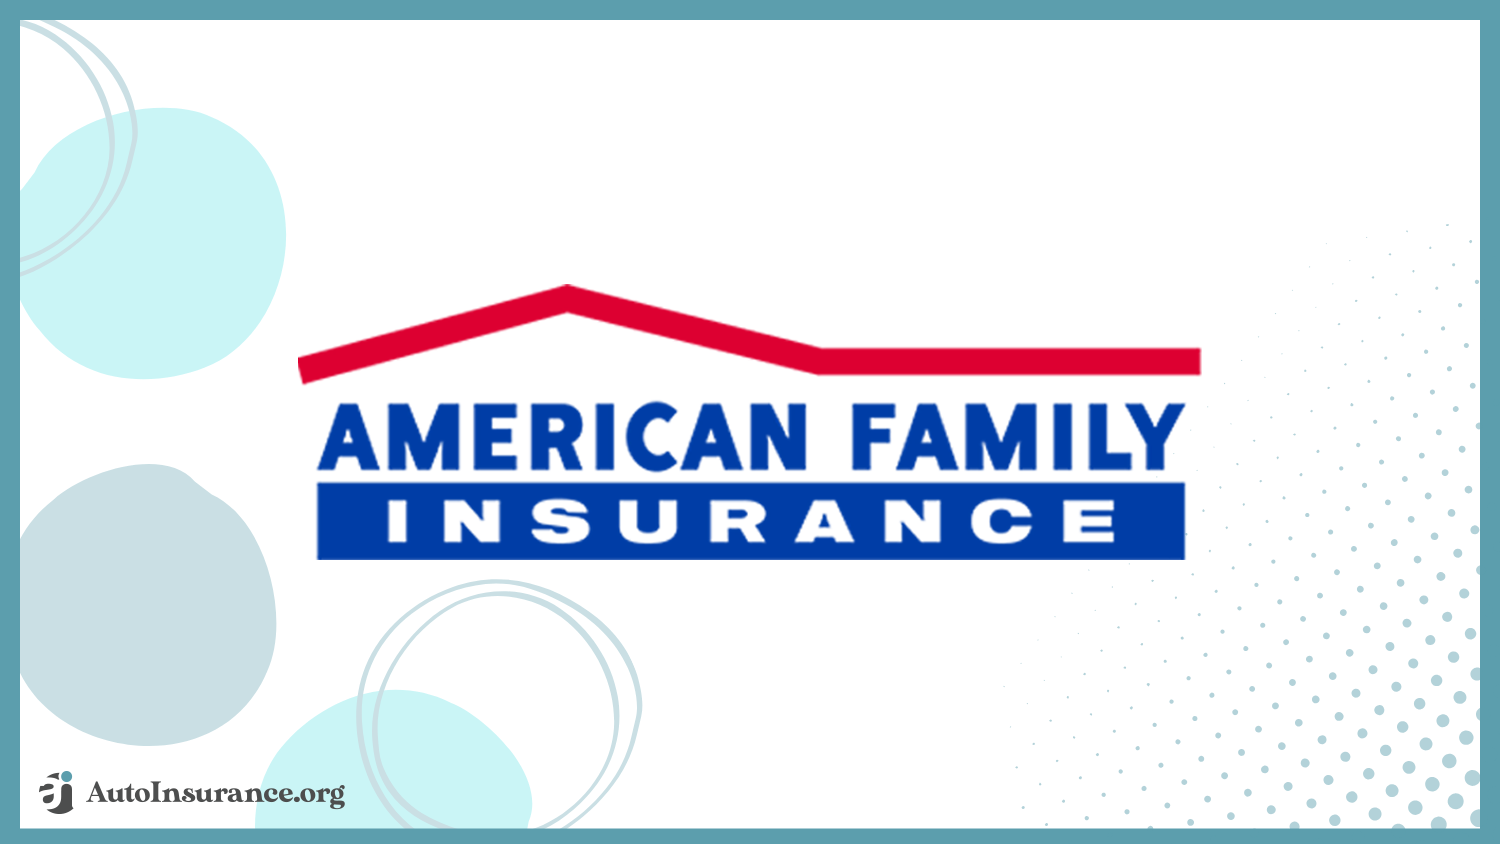 American Family: cheap auto insurance for union members